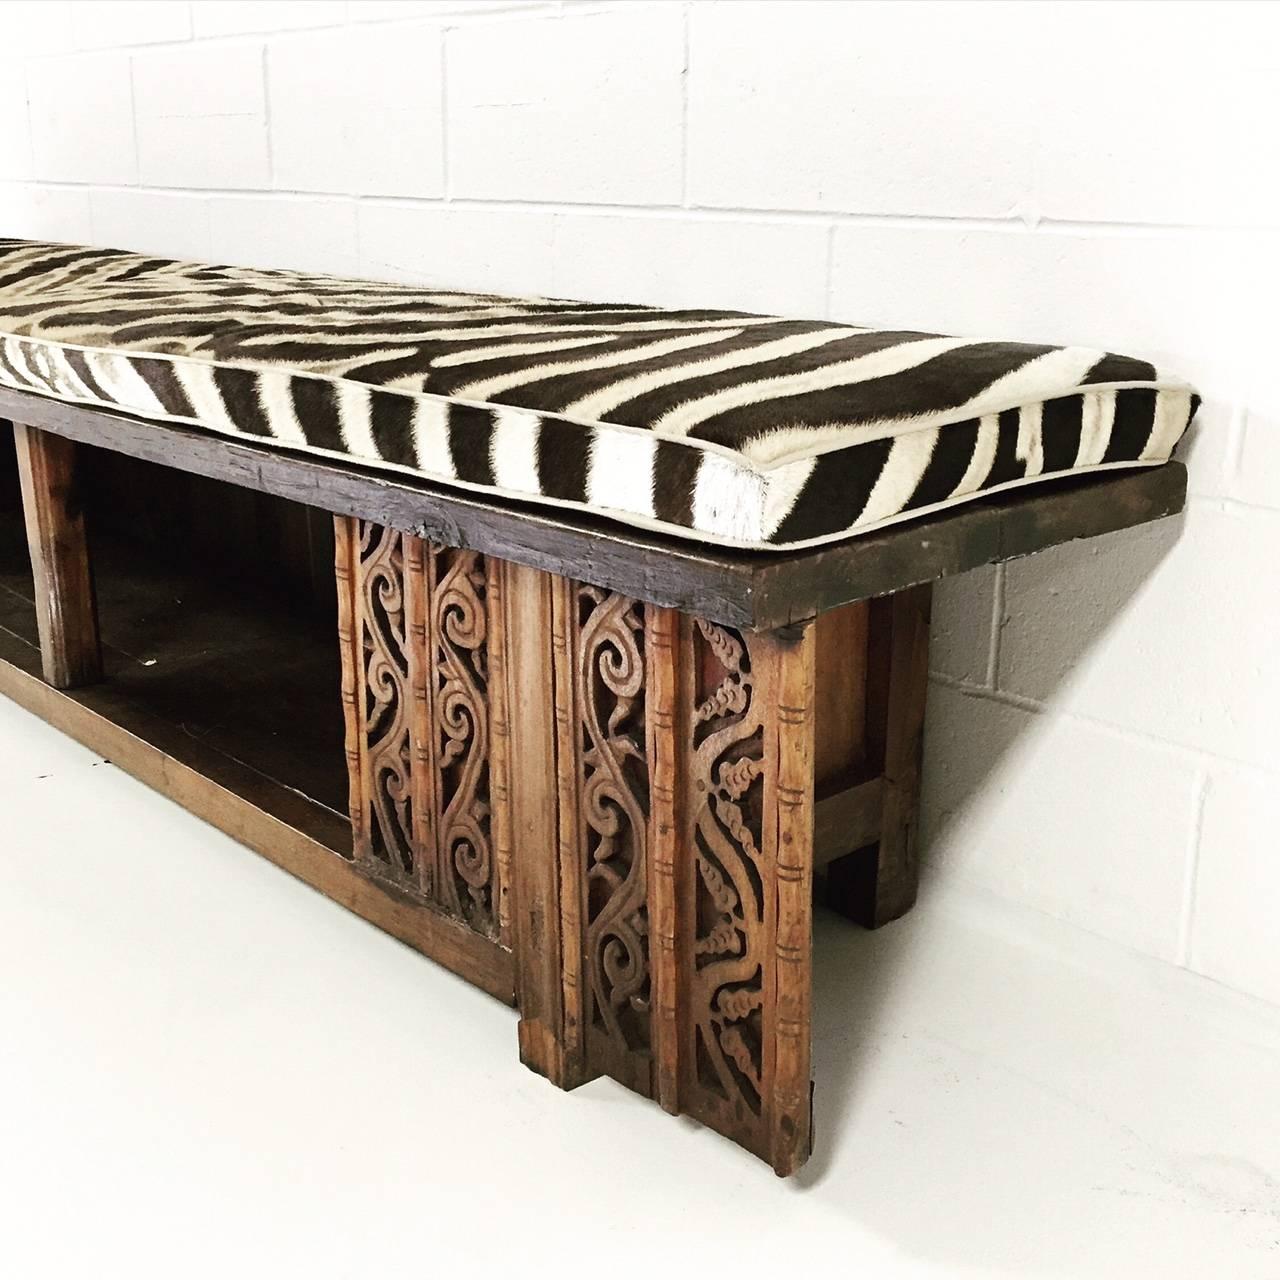 We salvaged the base of a Chinese work table and added new wooden slabs to make the top of this large ornately carved bench. The wide seat is perfect for a beautiful hallway catching kids, and dogs, and boots, and things. Or at the foot of a bed